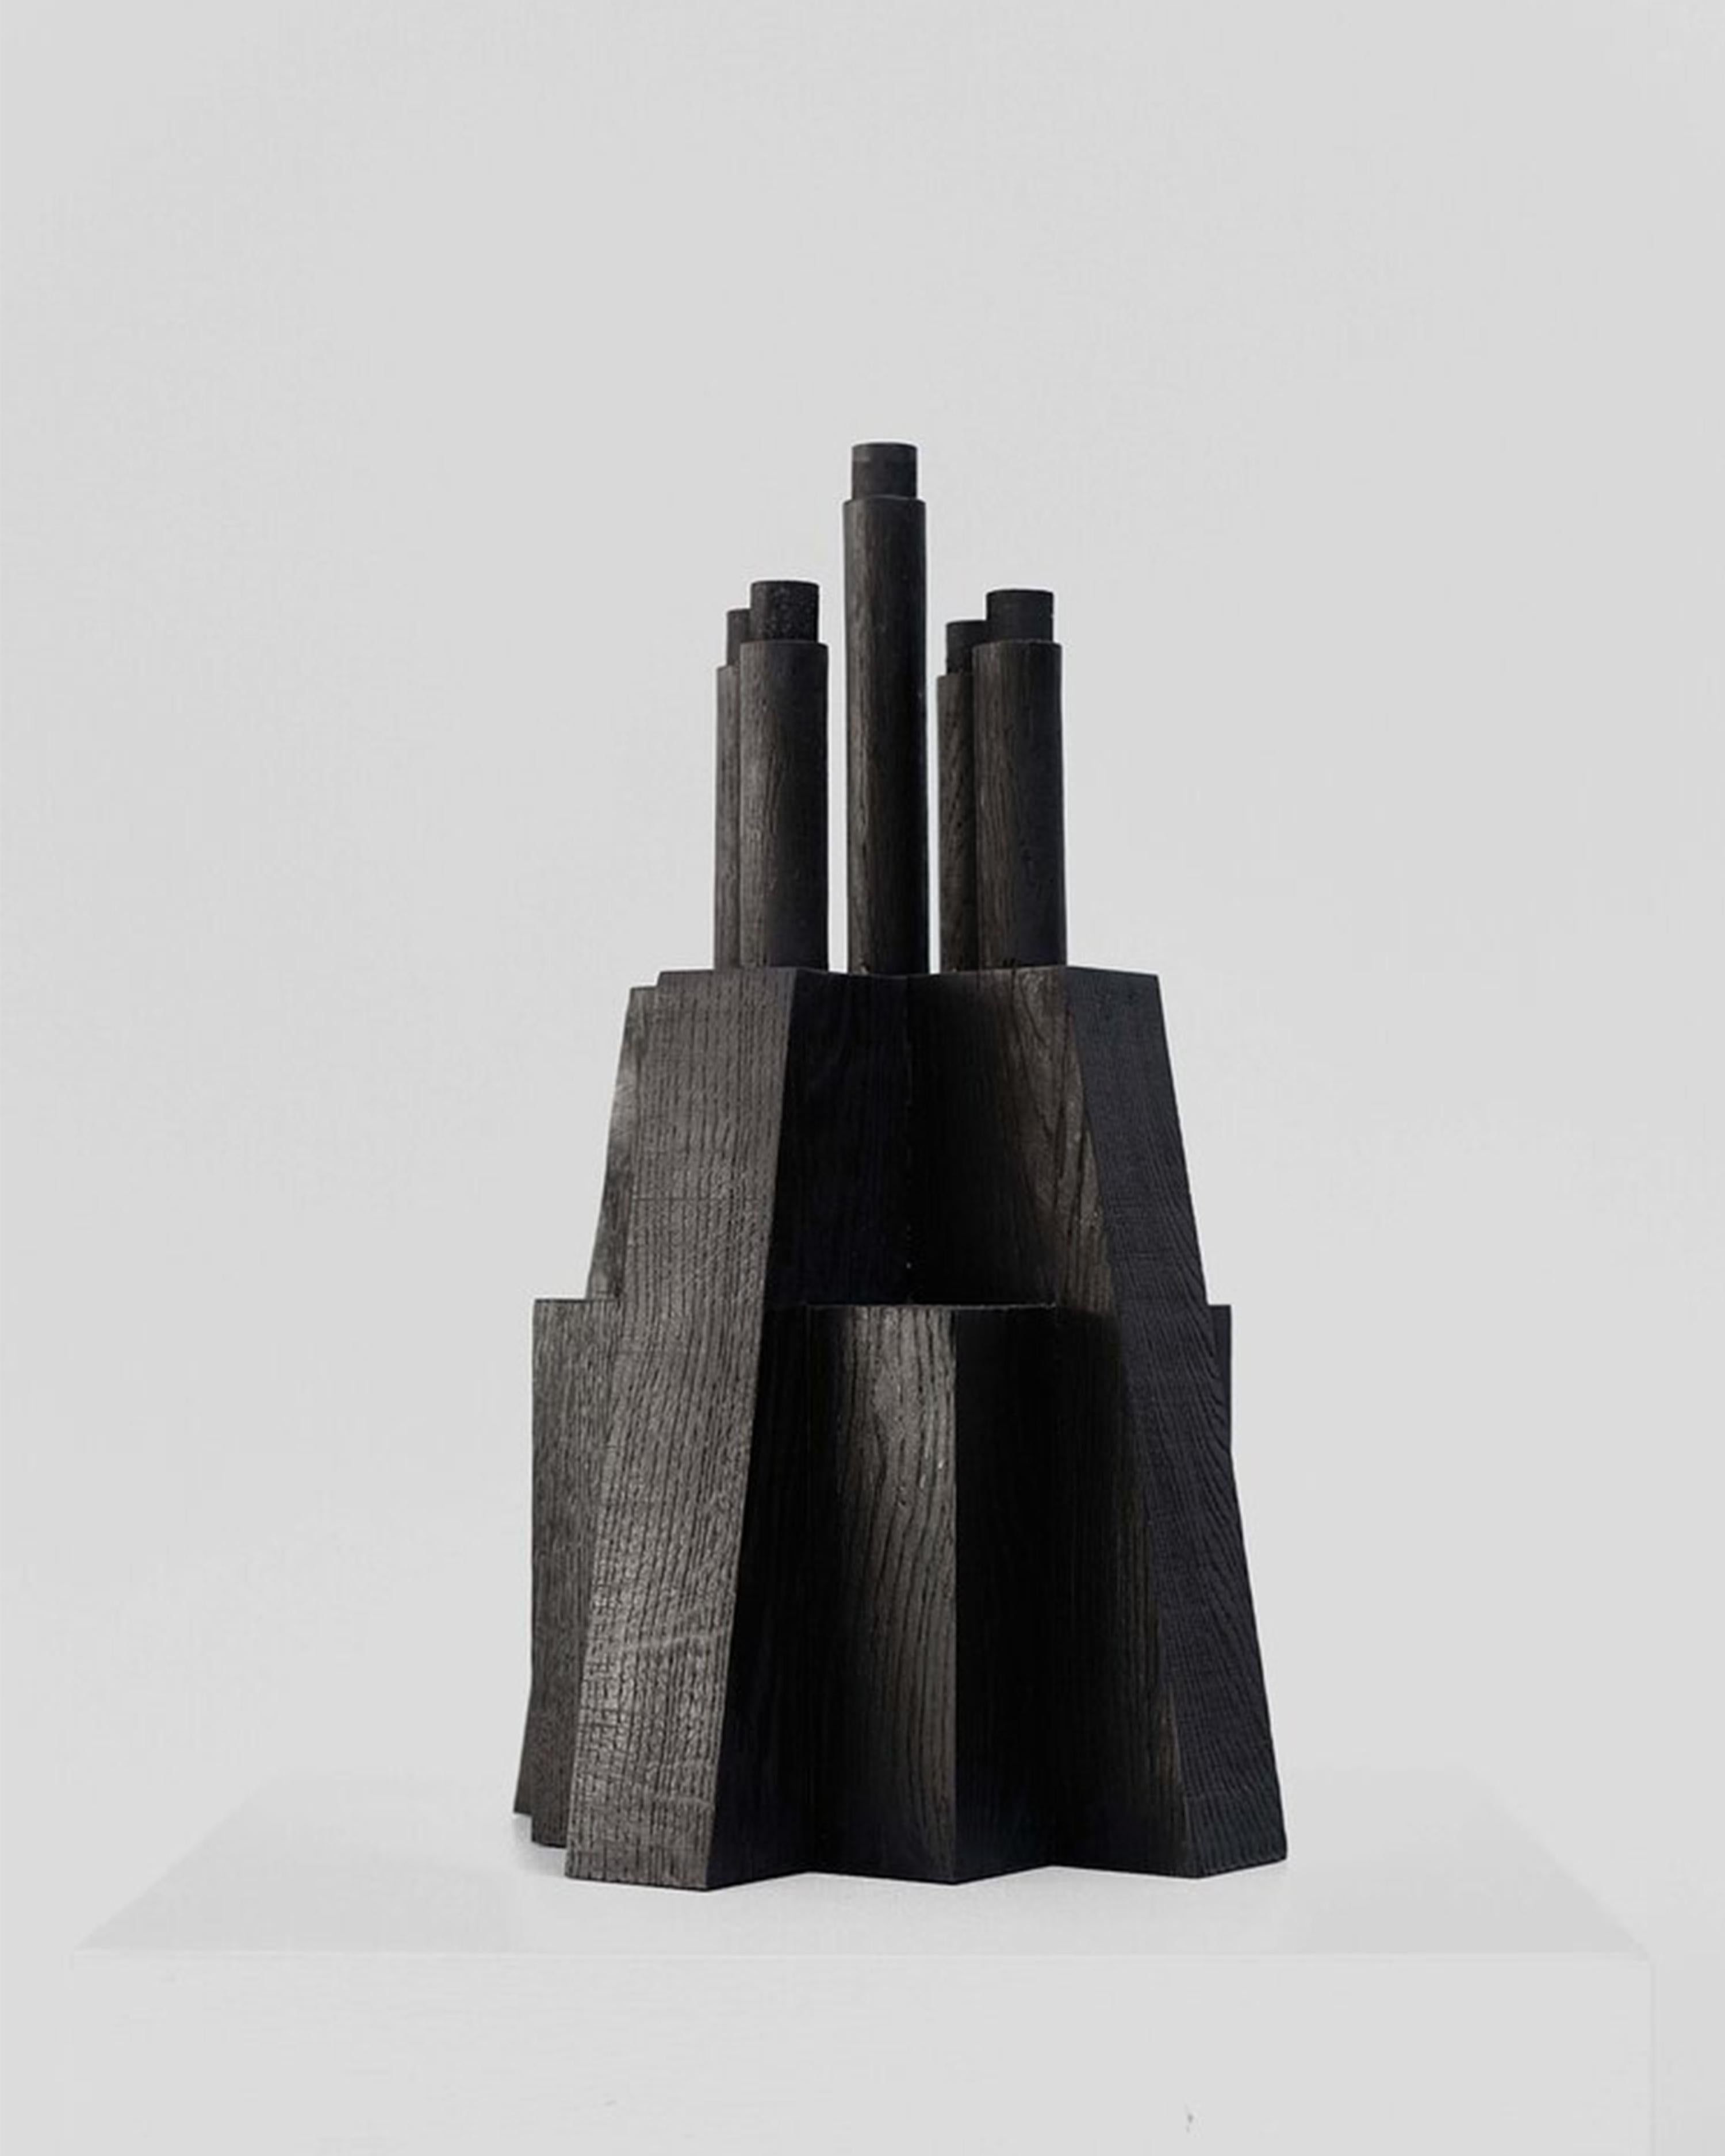 Bunker candle holder by Arno Declercq
Materials: Burned and waxed Oak.
Dimensions: W 32 x D 32 x H 50 cm.


Arno Declercq
Belgian designer and art dealer who makes bespoke objects with passion for design, atmosphere, history and craft. Arno grew up